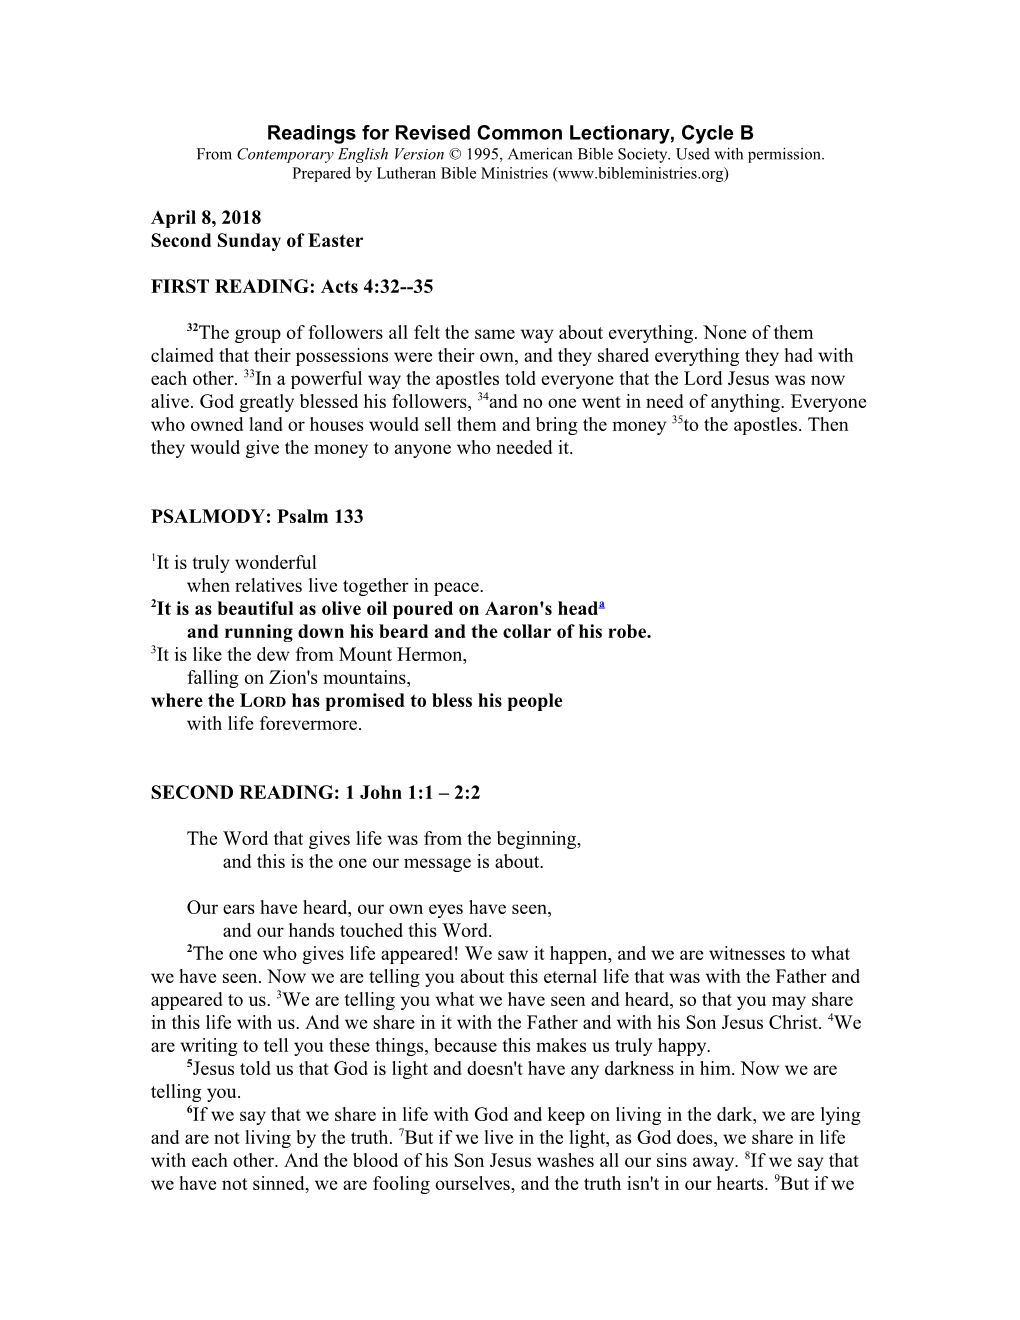 Readings for Revised Common Lectionary, Cycle A s1